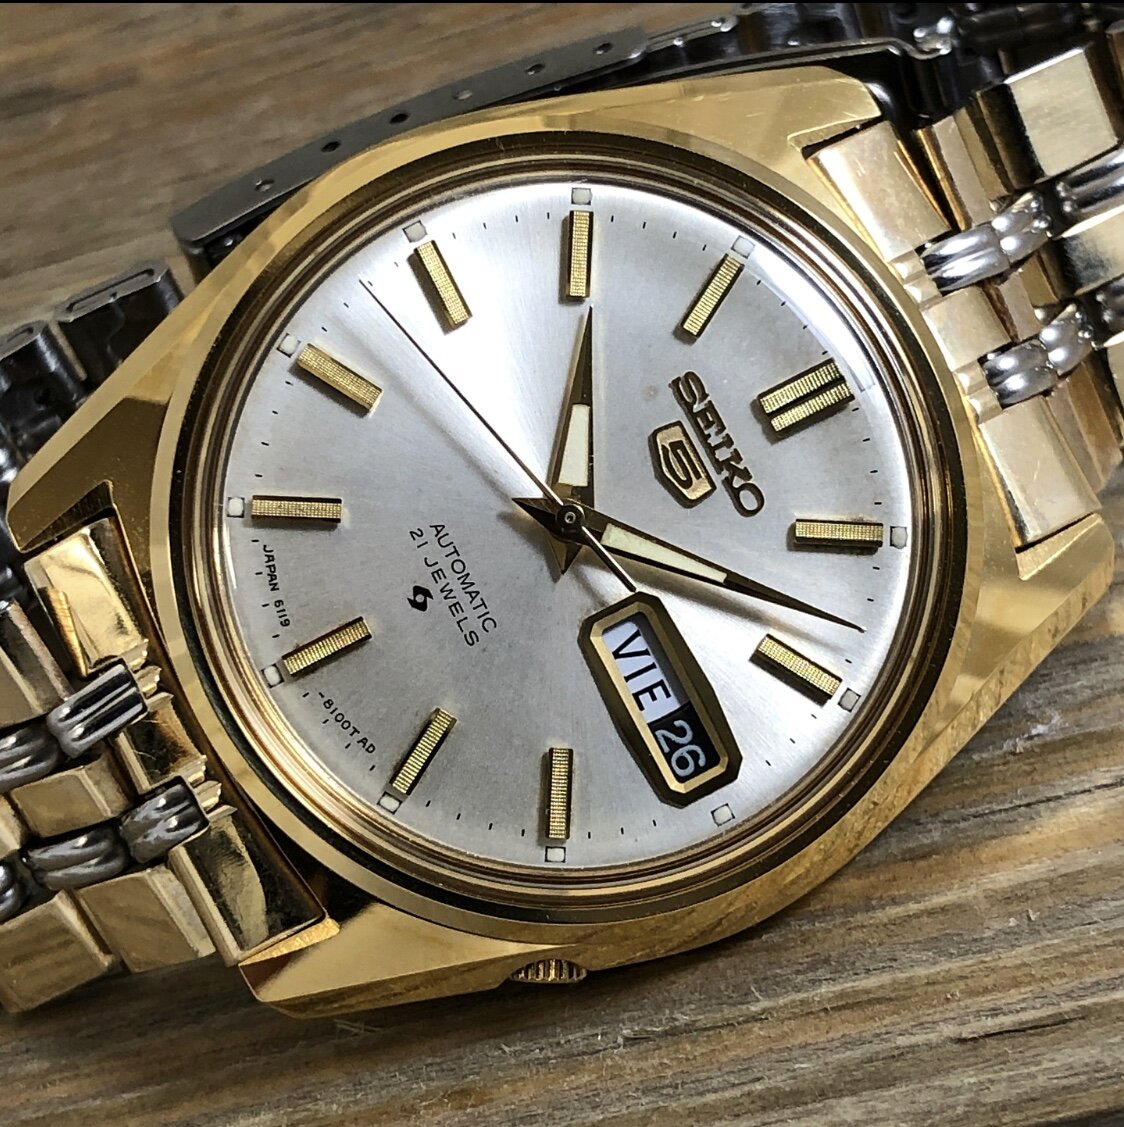 1970 NOS Seiko 6119-8090 “5” Automatic Day/Date (Gold Filled) FULL KIT